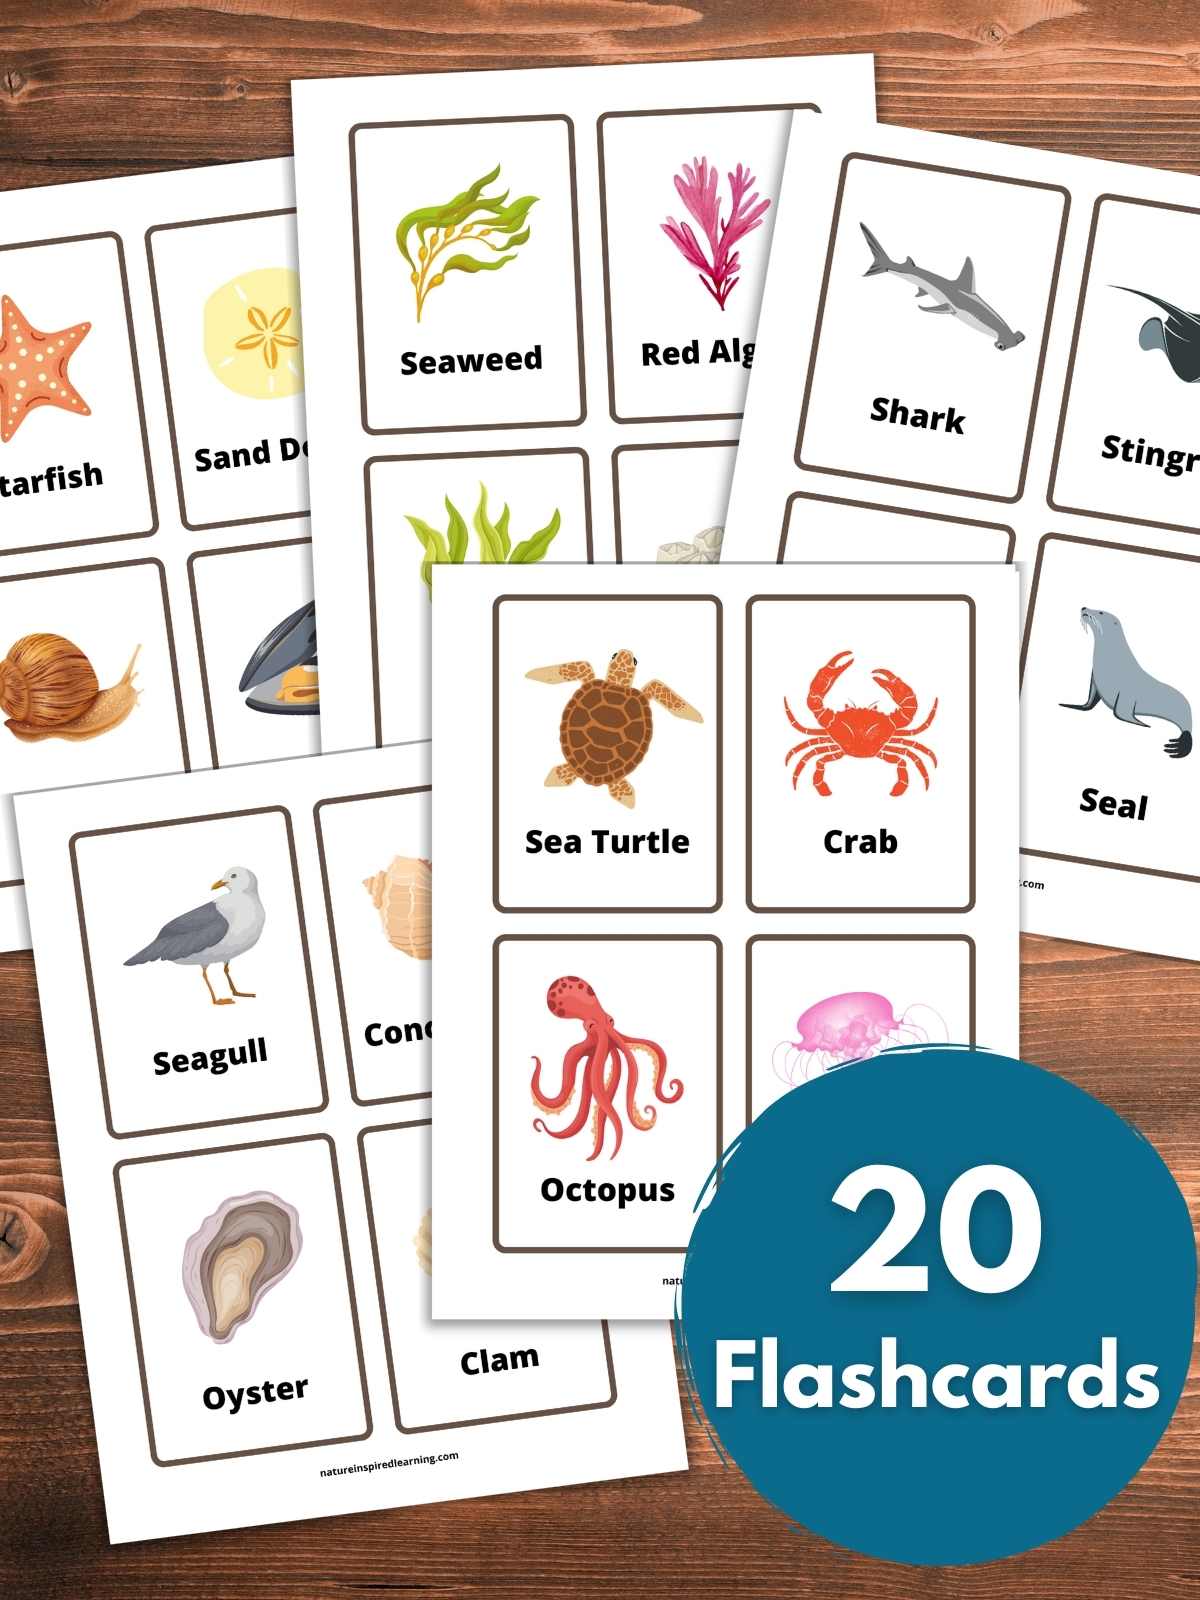 Ocean Flashcards (Free Printable) - Nature Inspired Learning